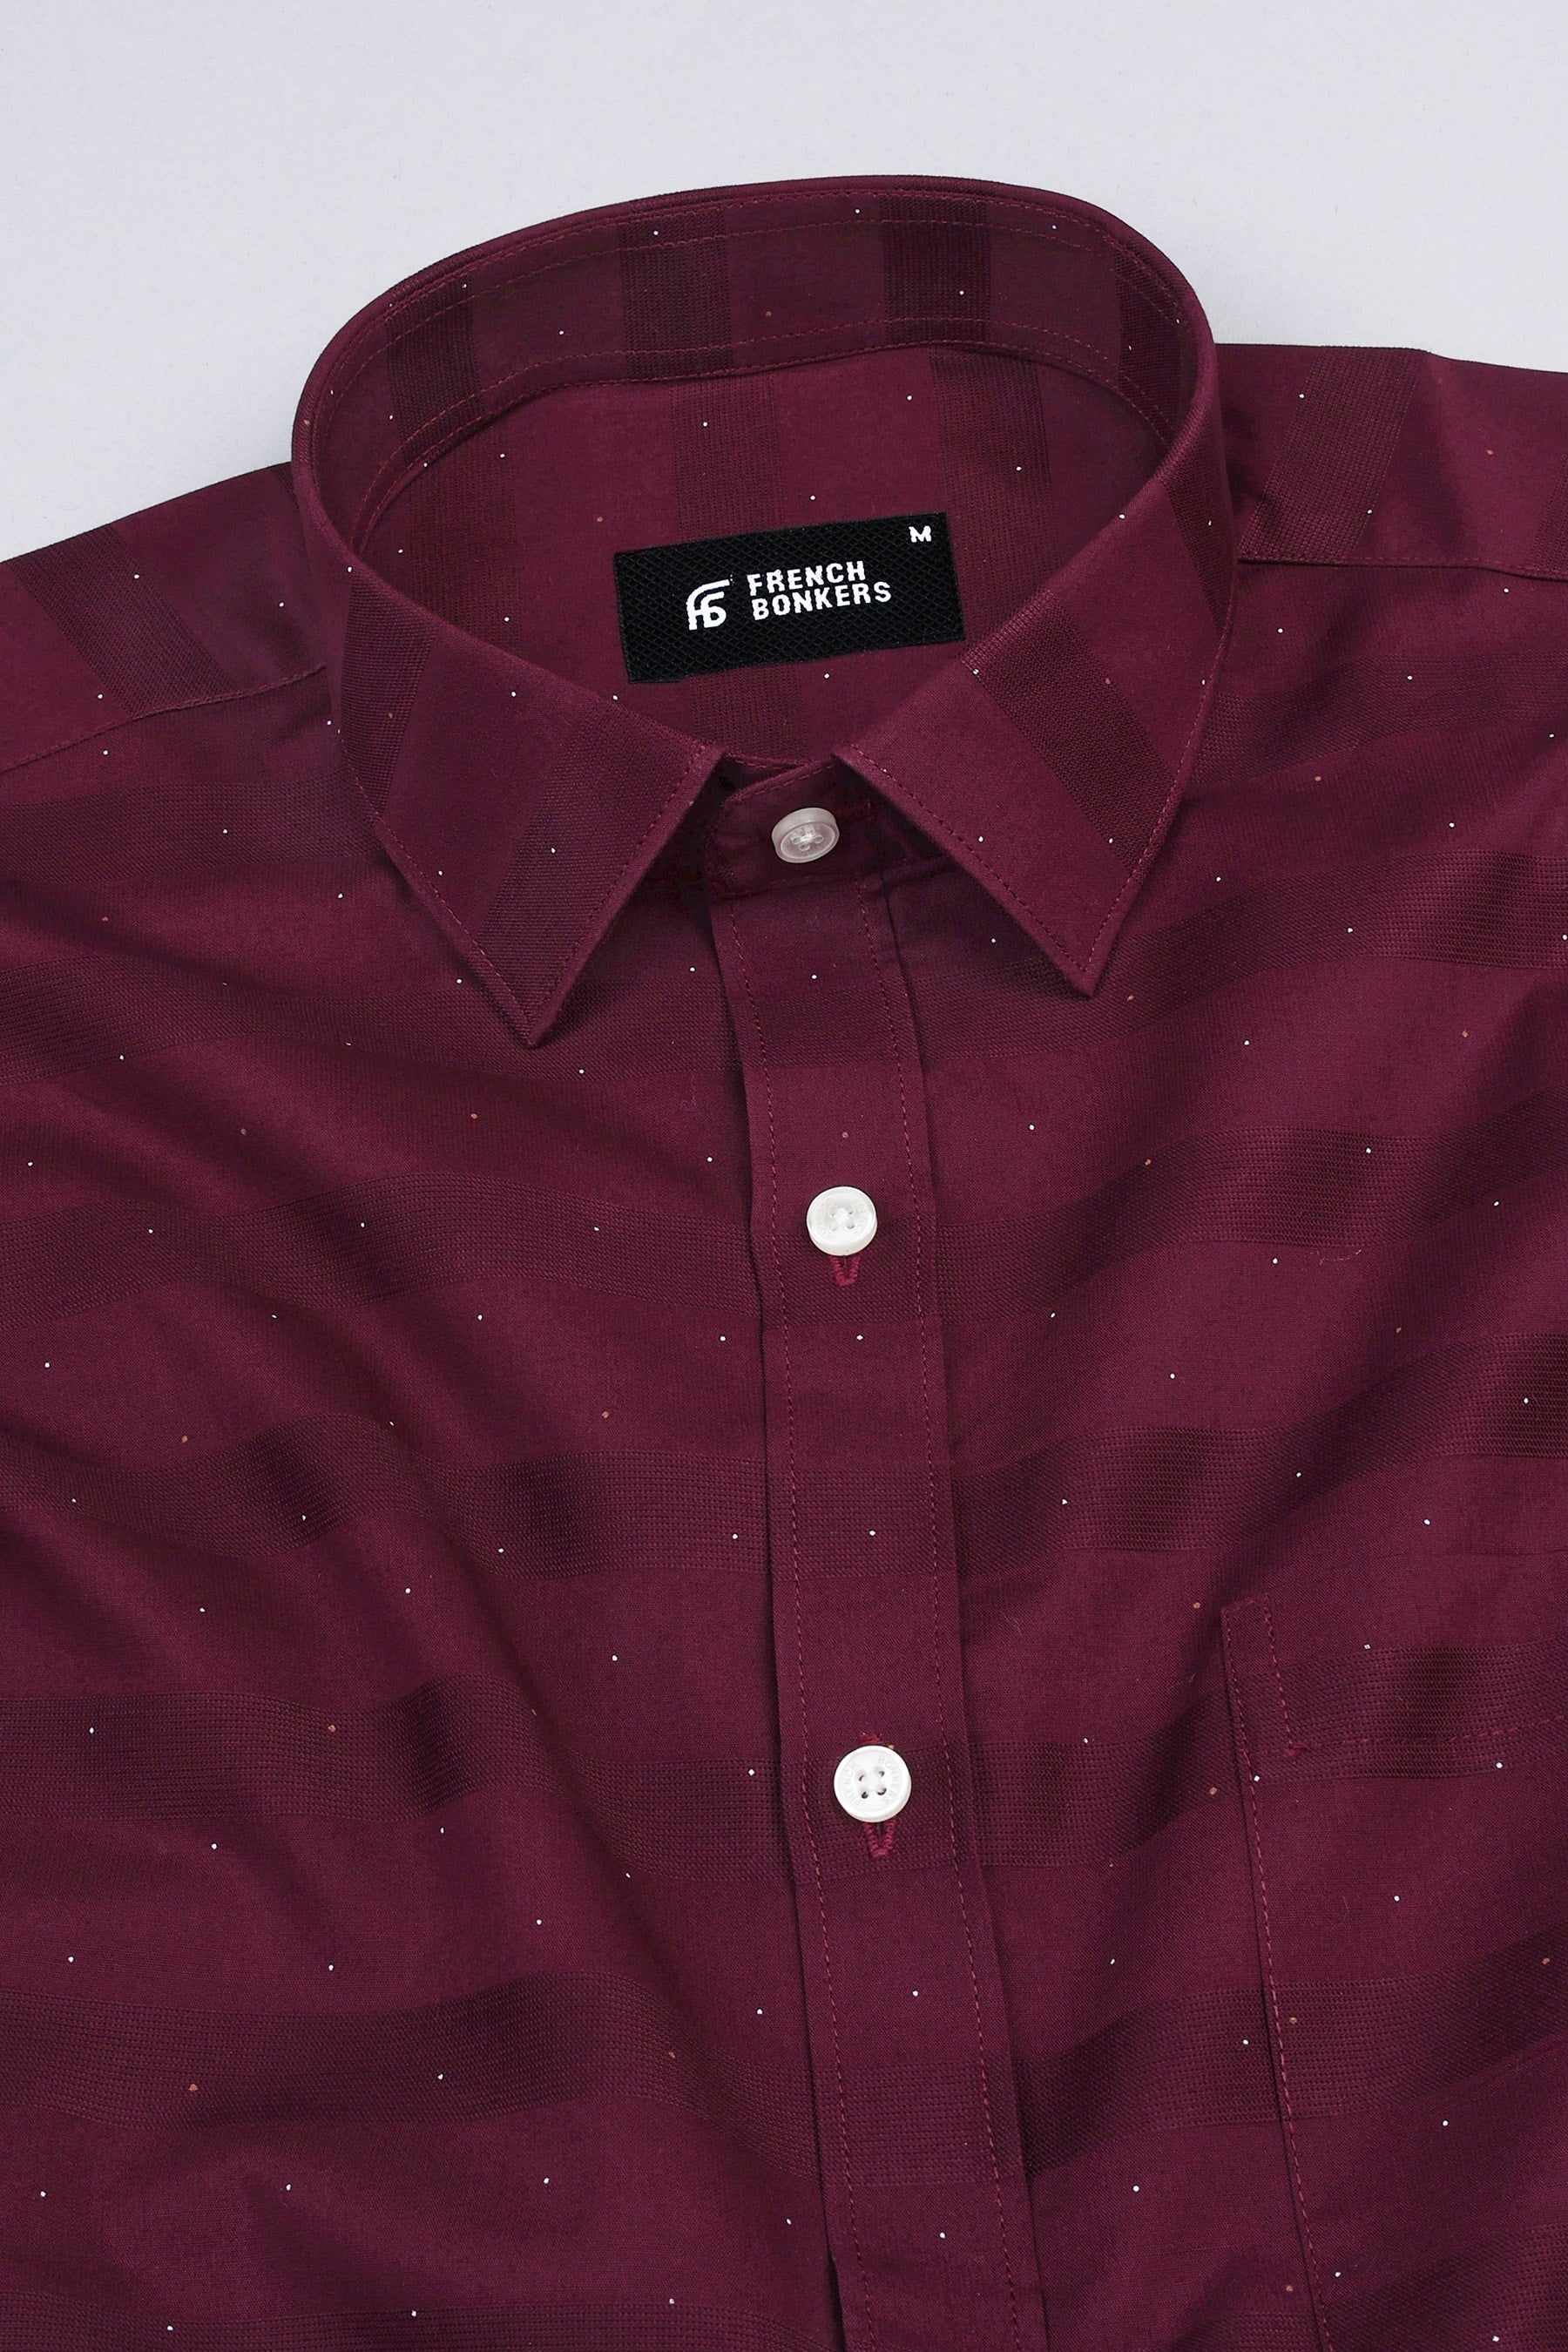 Wine red with dot printed awning stripe shirt